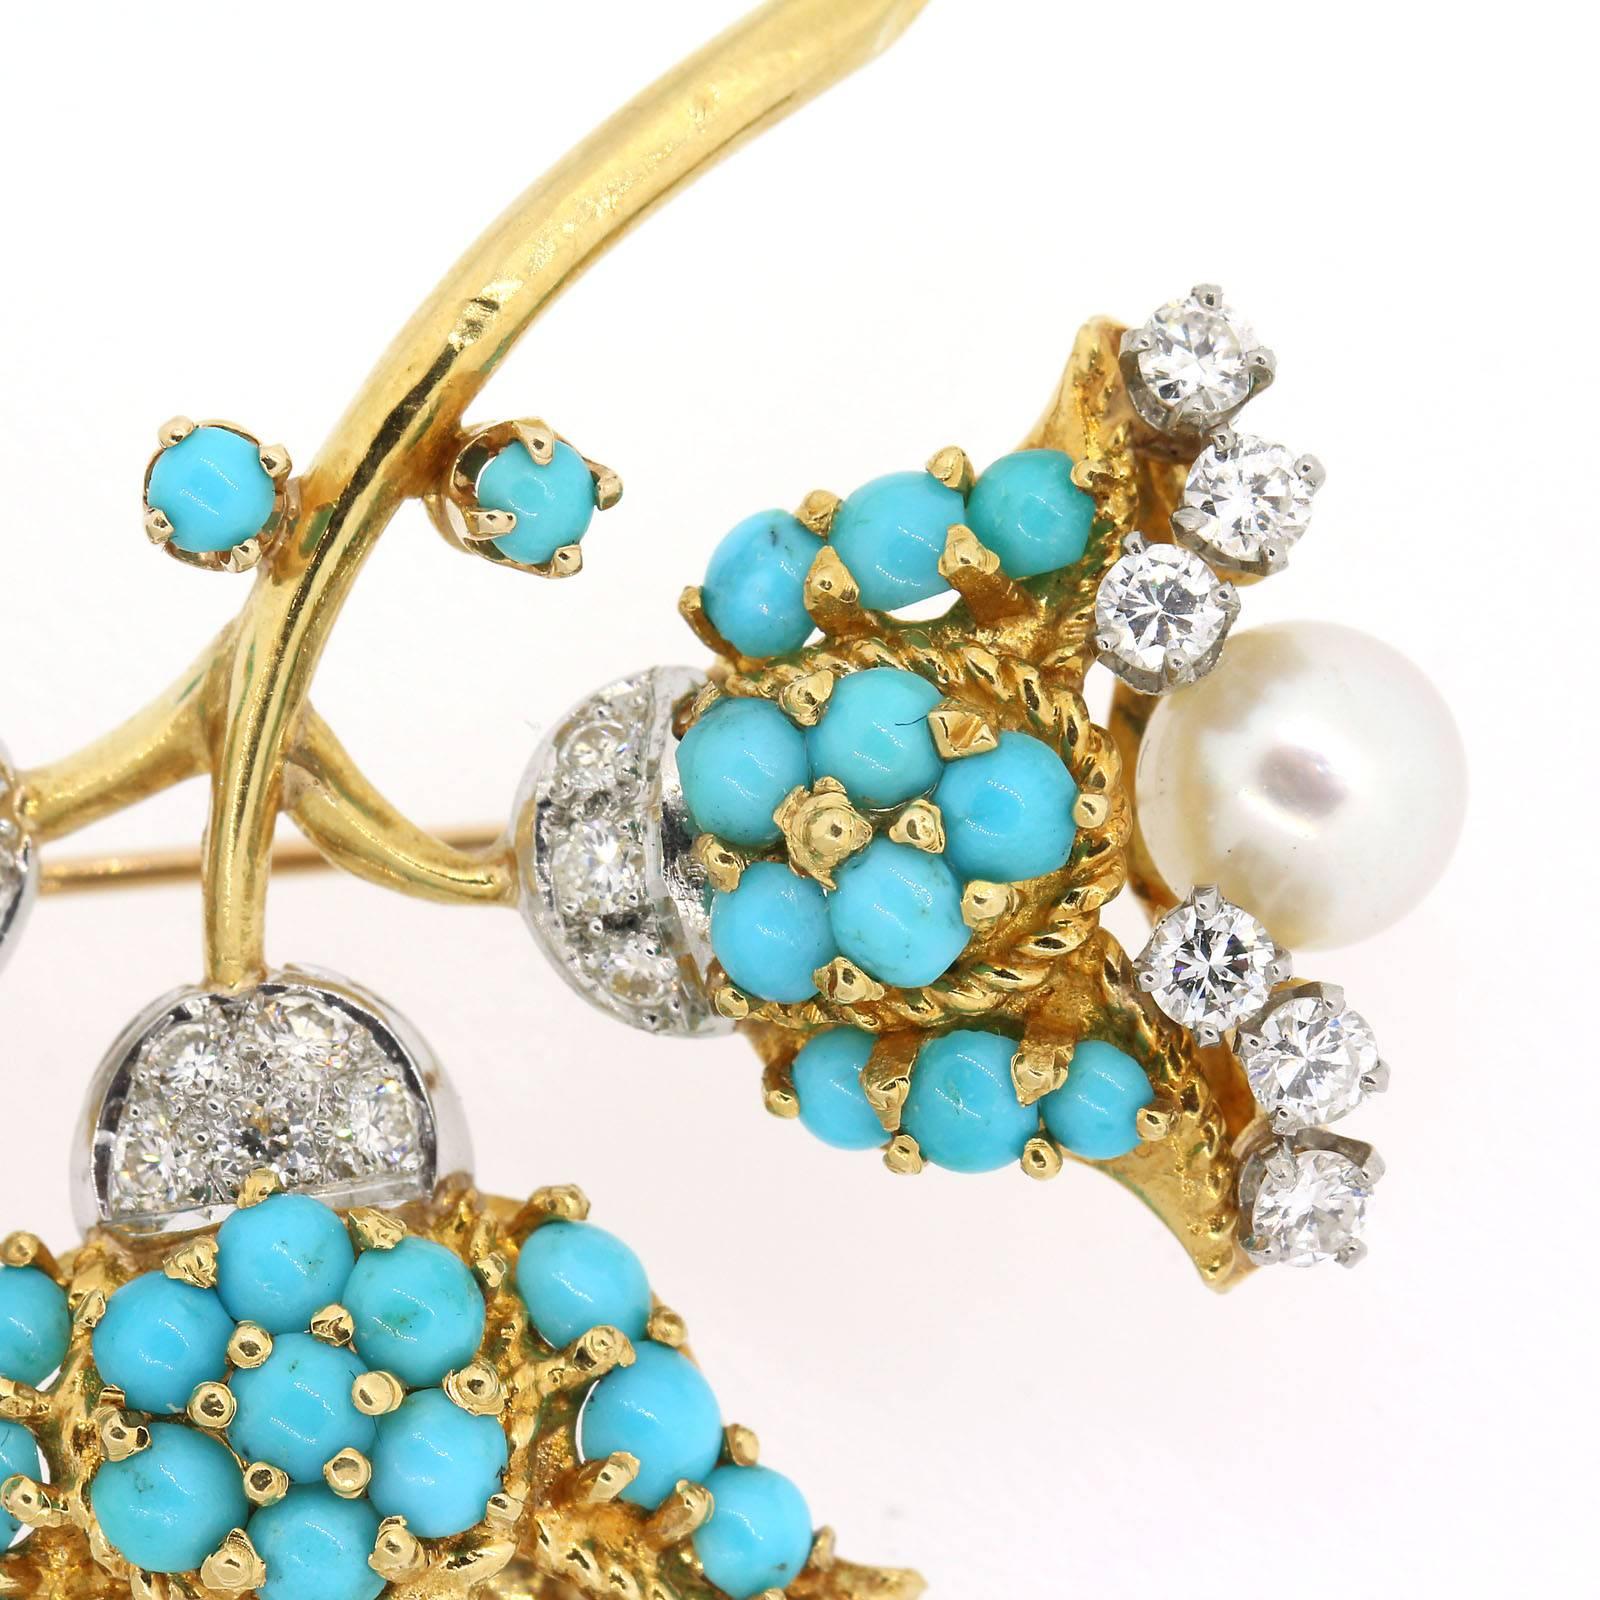 Elegantly Impressive,  three flower branch brooch set with a cluster of cabochon Turquoise and each flower featuring a 6.00 mm white cultured pearls and accented with one carat and half of Round Brilliant Cut Diamonds.  The brooch is fabricated in